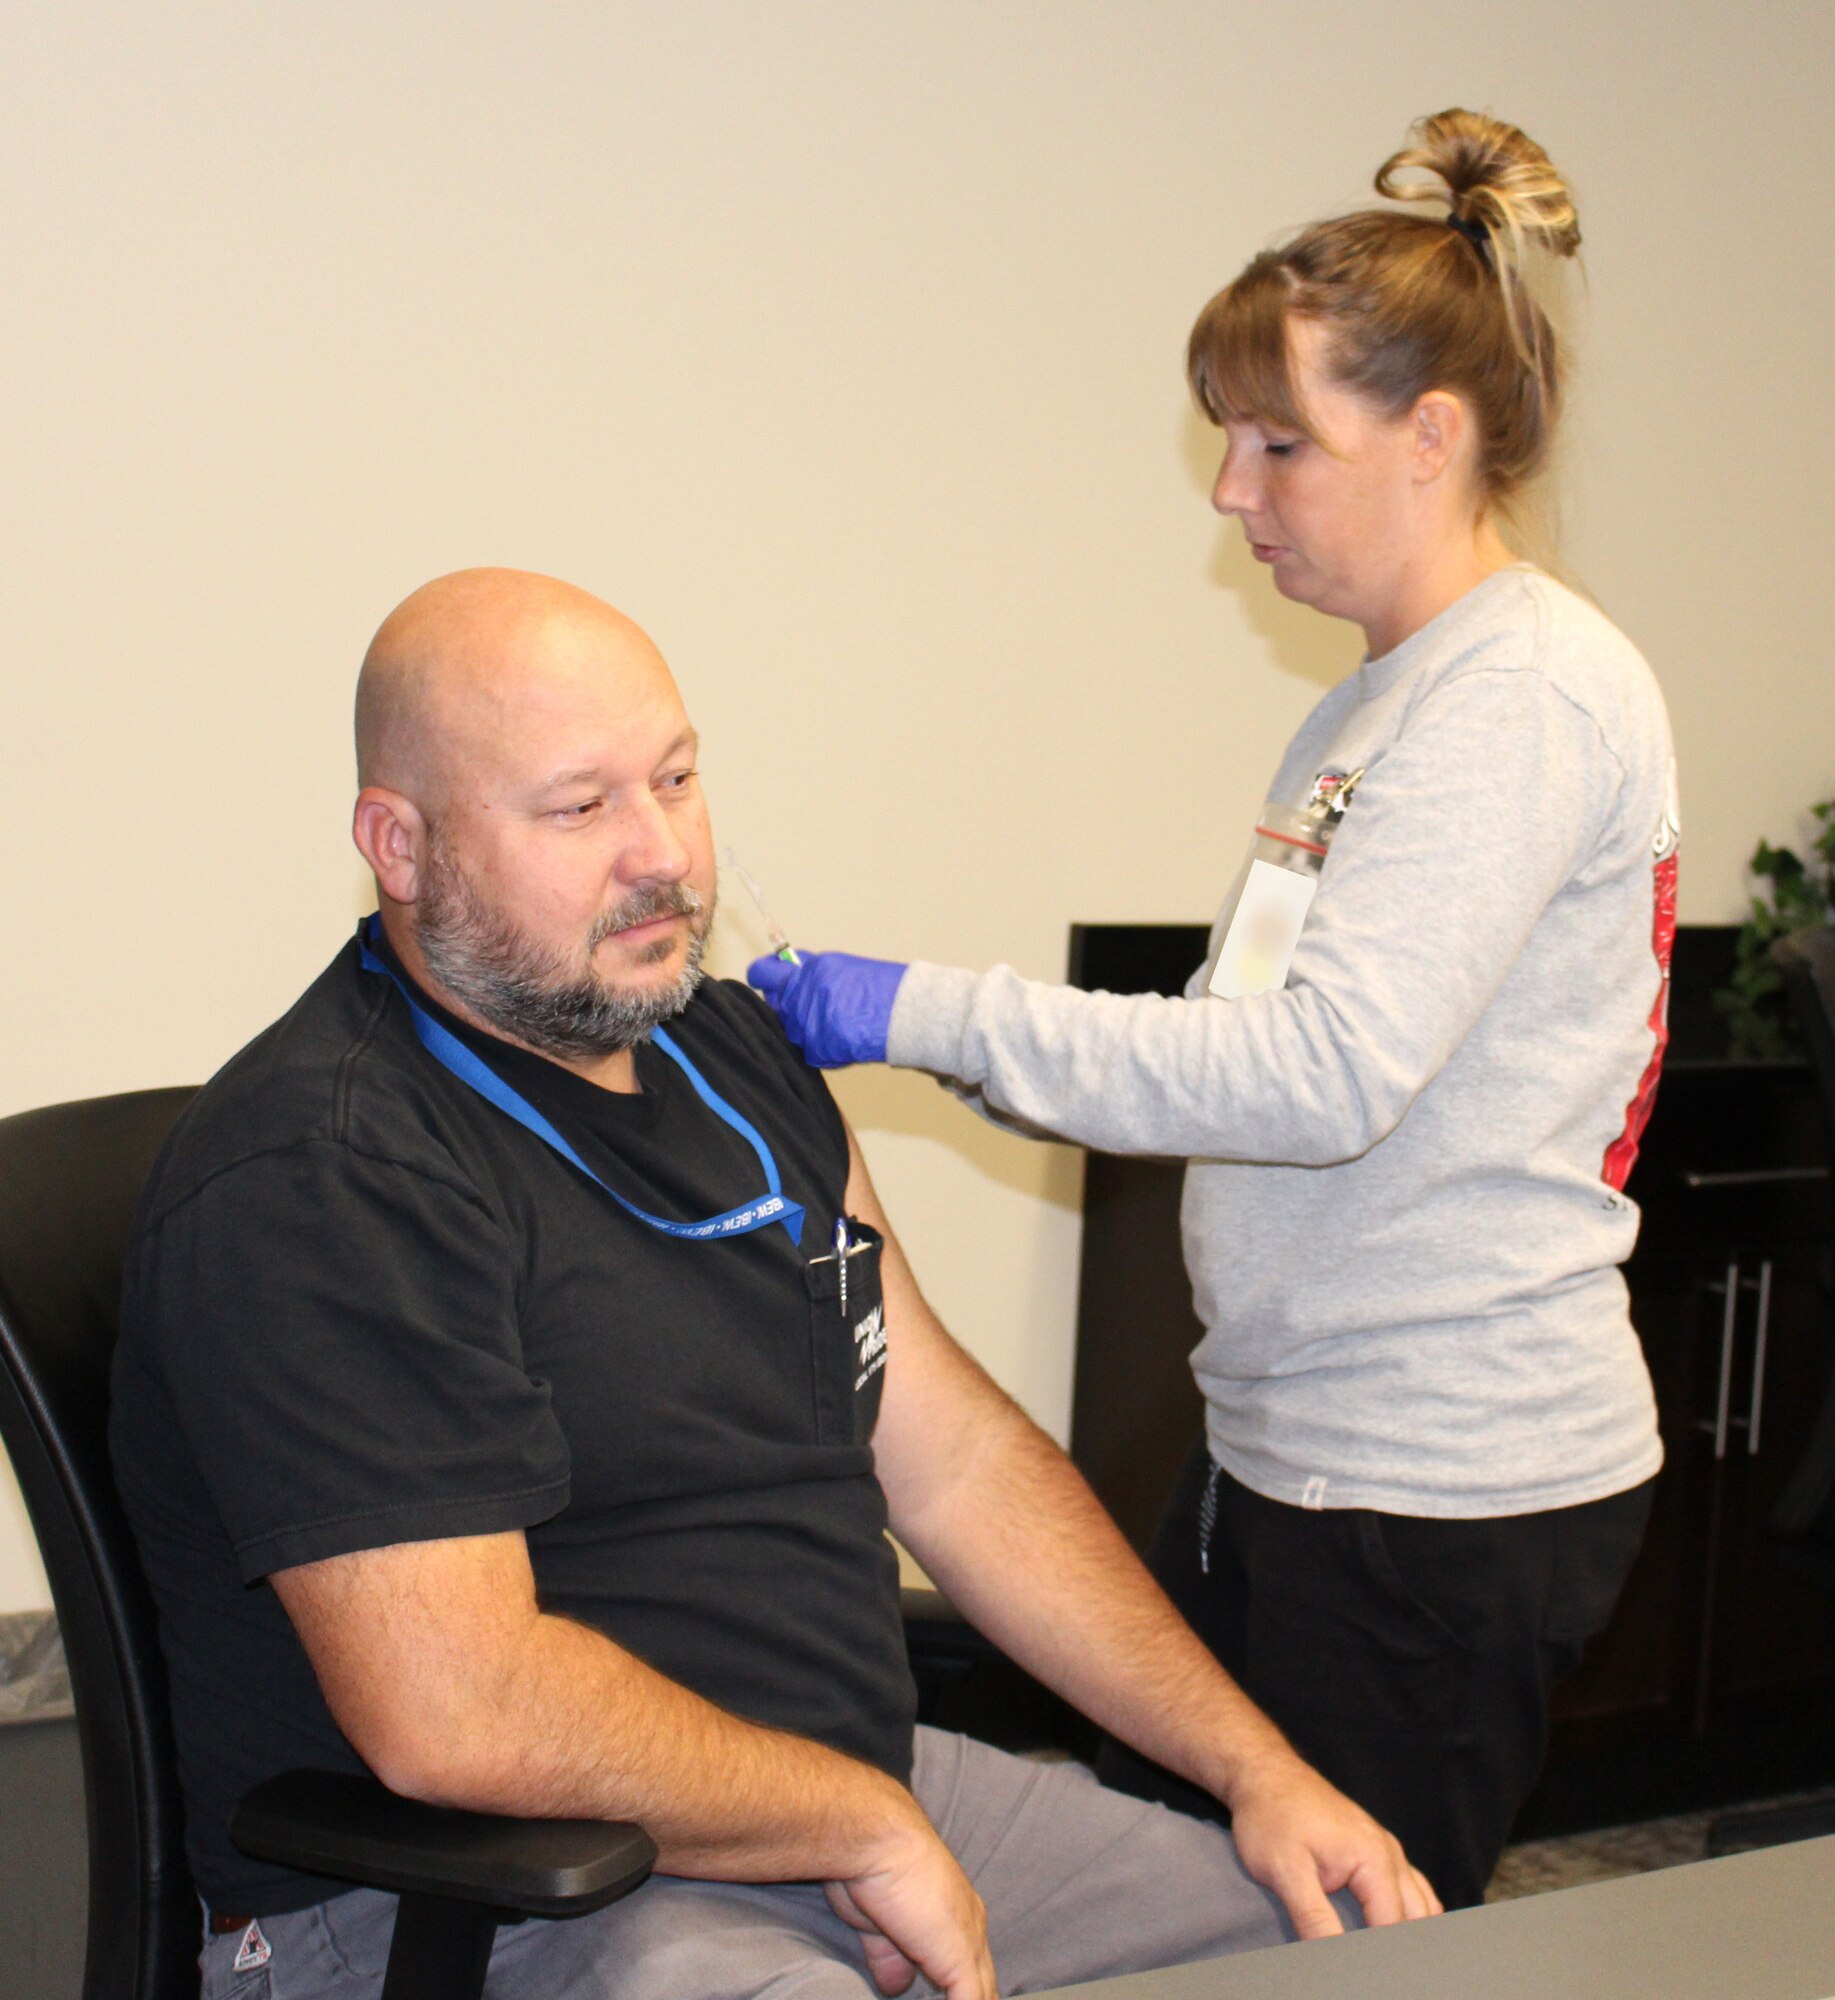 Teala Donaldson, with the Coffee County Health Department, administers a vaccination to Arnold Engineering Development Complex team member Michael Cleek.